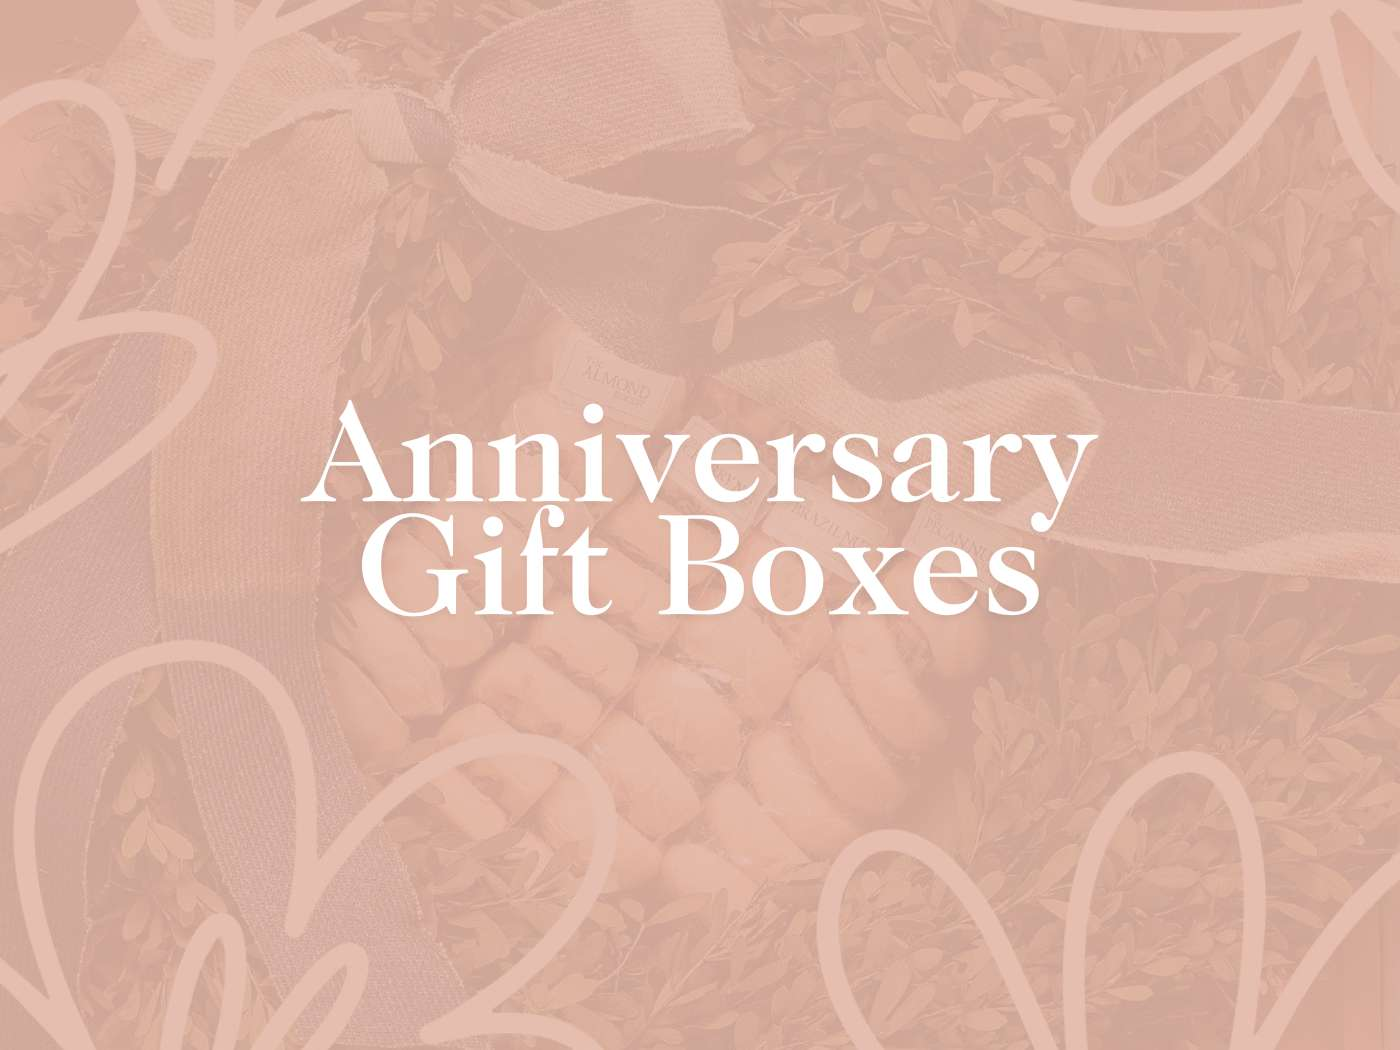 Elegant and soft-toned design heralding the Anniversary Gift Boxes collection, thoughtfully prepared by Fabulous Flowers and Gifts.